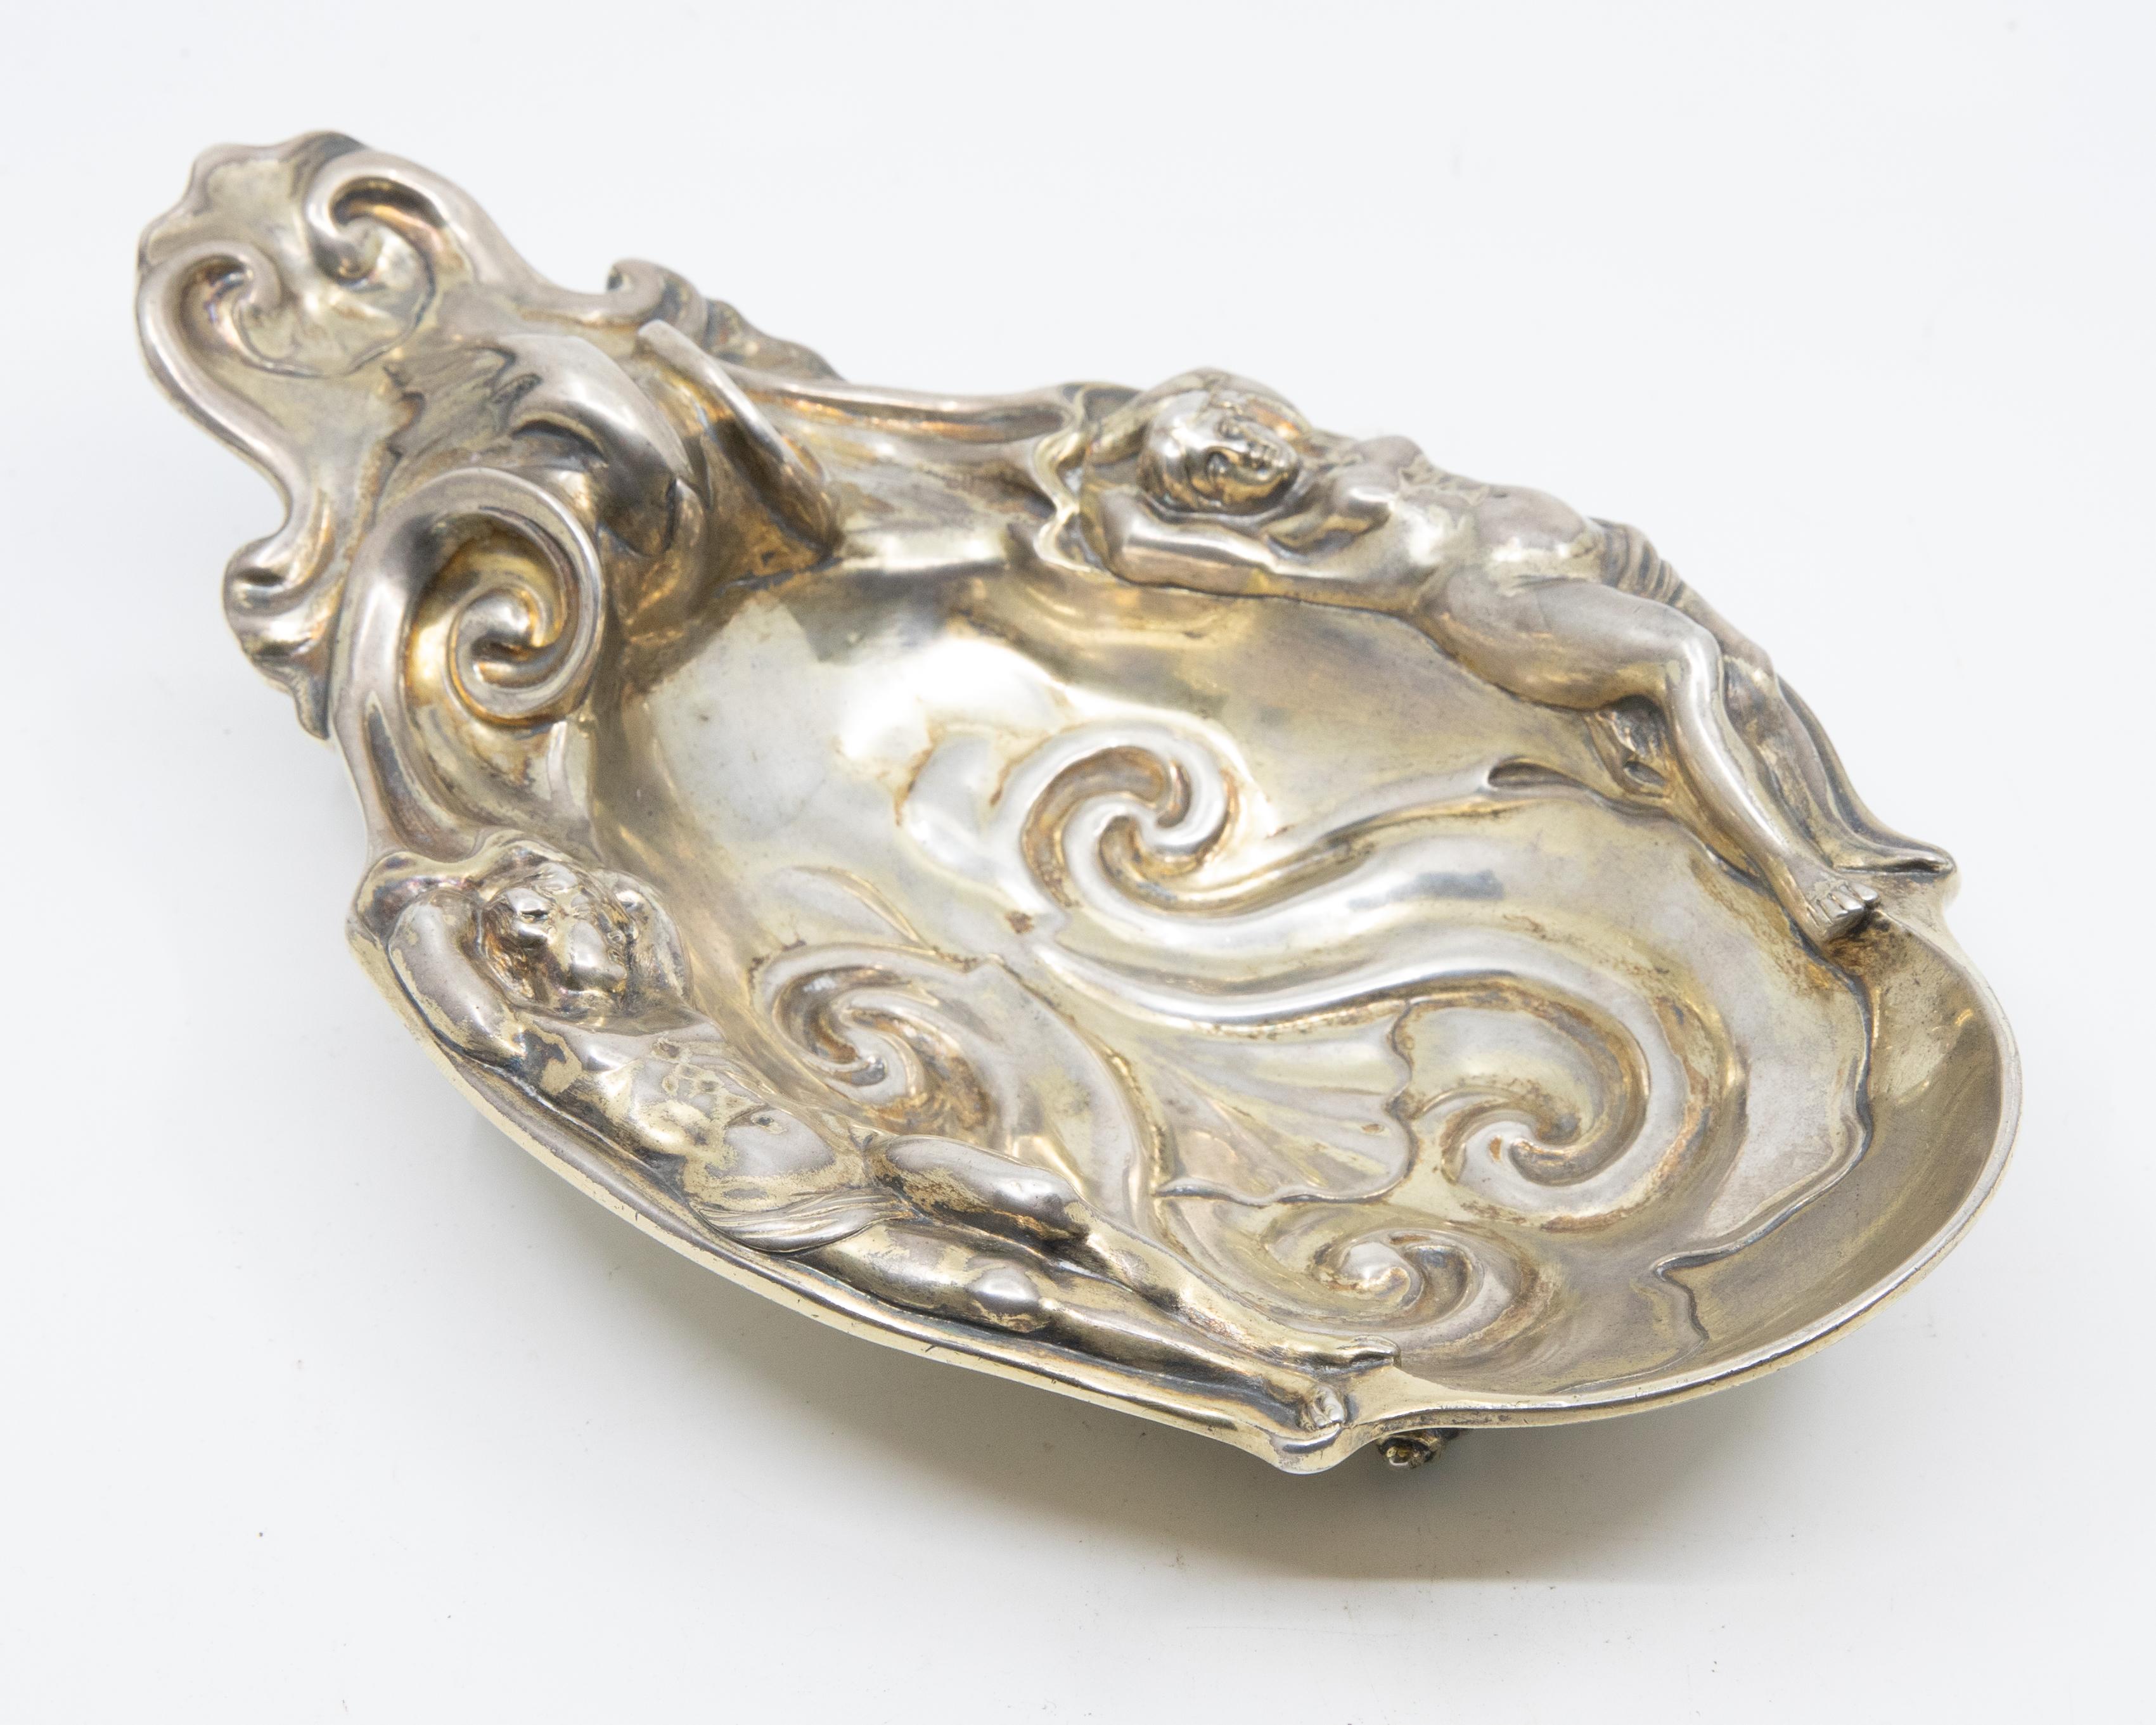 Offered is an extremely rare Renaissance Revival, Robert Garrard gilt over sterling silver dish decorated with nude male and female figures. The piece is marked sterling, R & S Garrard, London and dated for 1873. The company that was to become